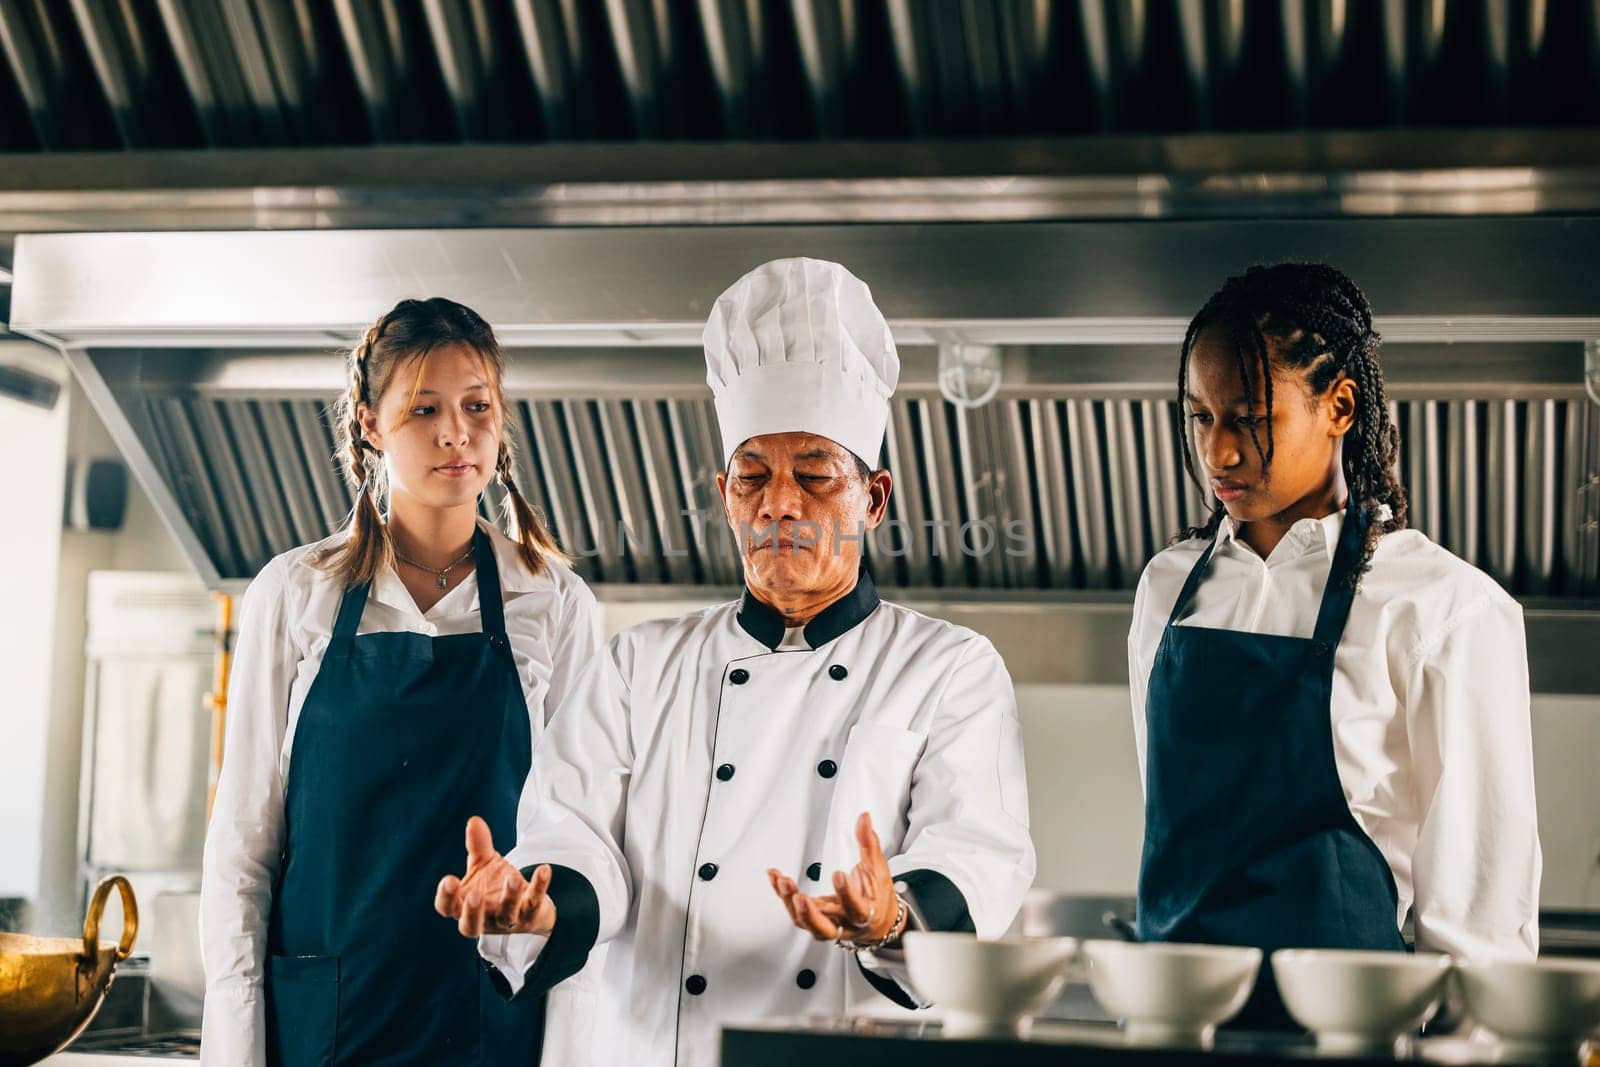 In a restaurant kitchen an Asian senior chef professionally teaches diverse students cooking. Emphasizing teamwork learning and note-taking in the workshop. Food Edocation by Sorapop